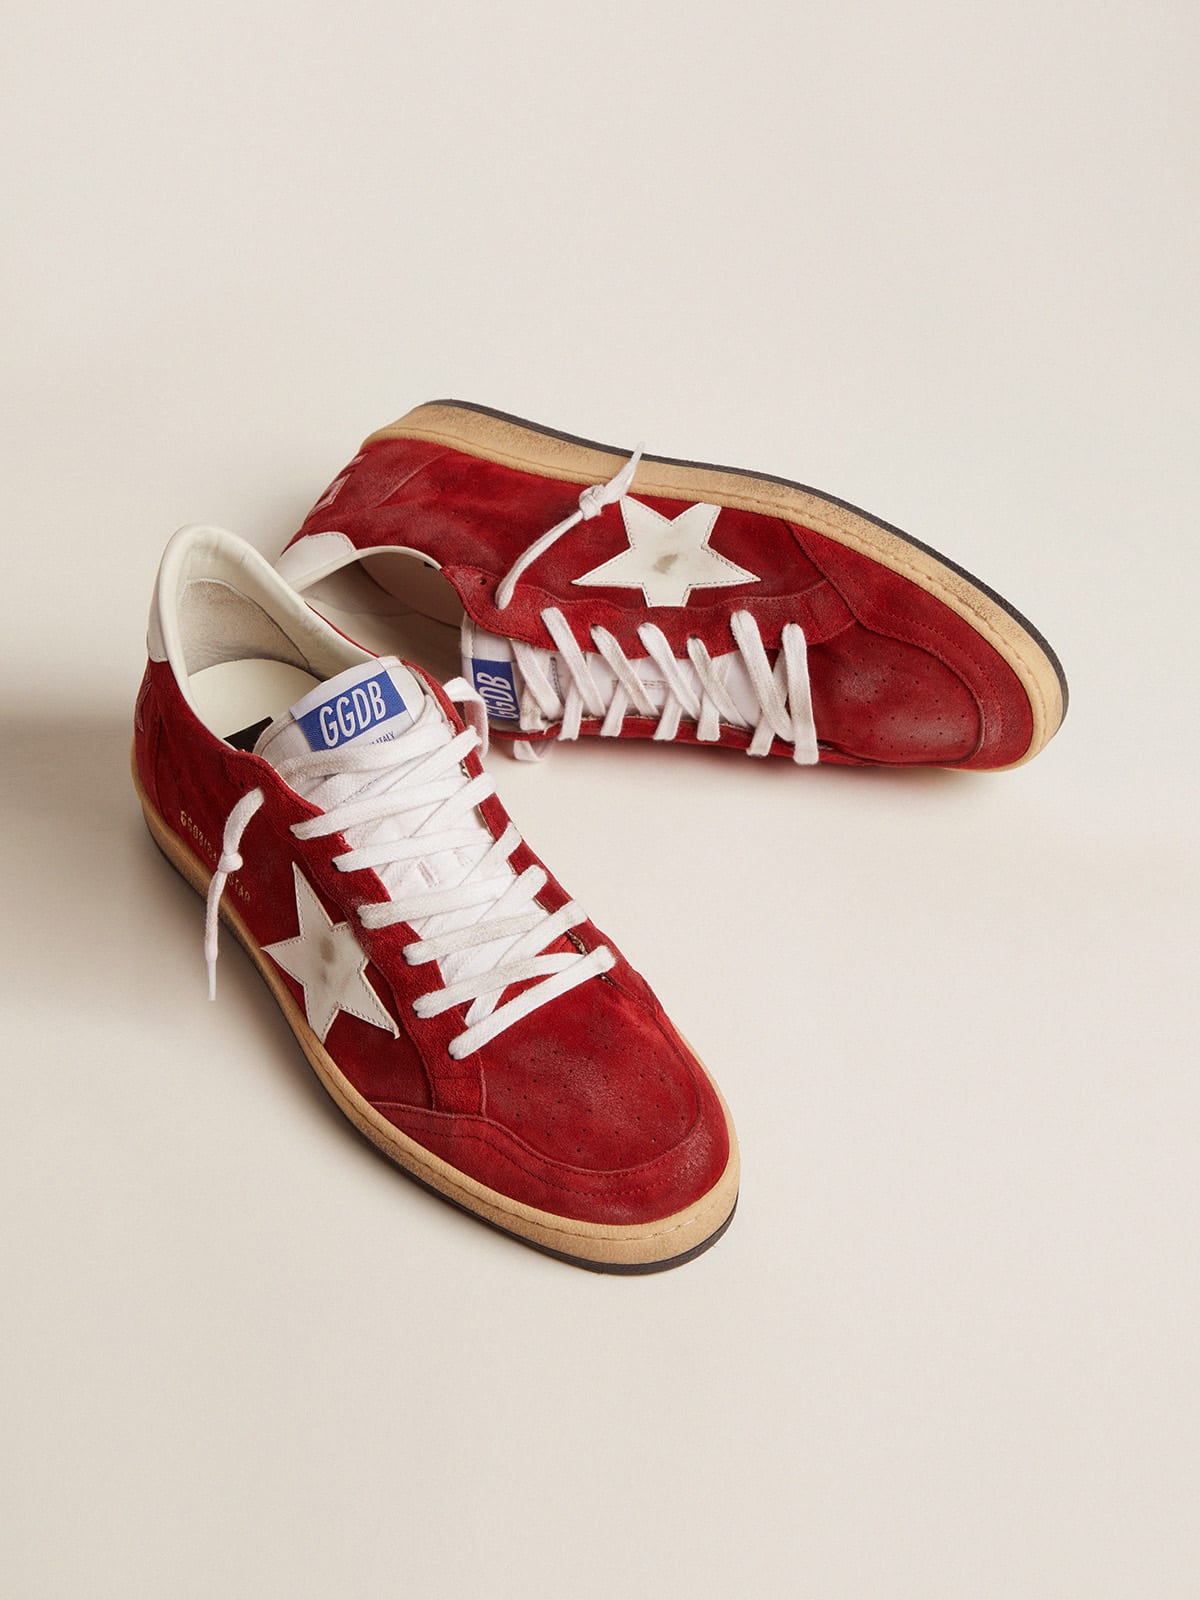 Golden Goose - Men’s Ball Star in red suede with white leather star in 